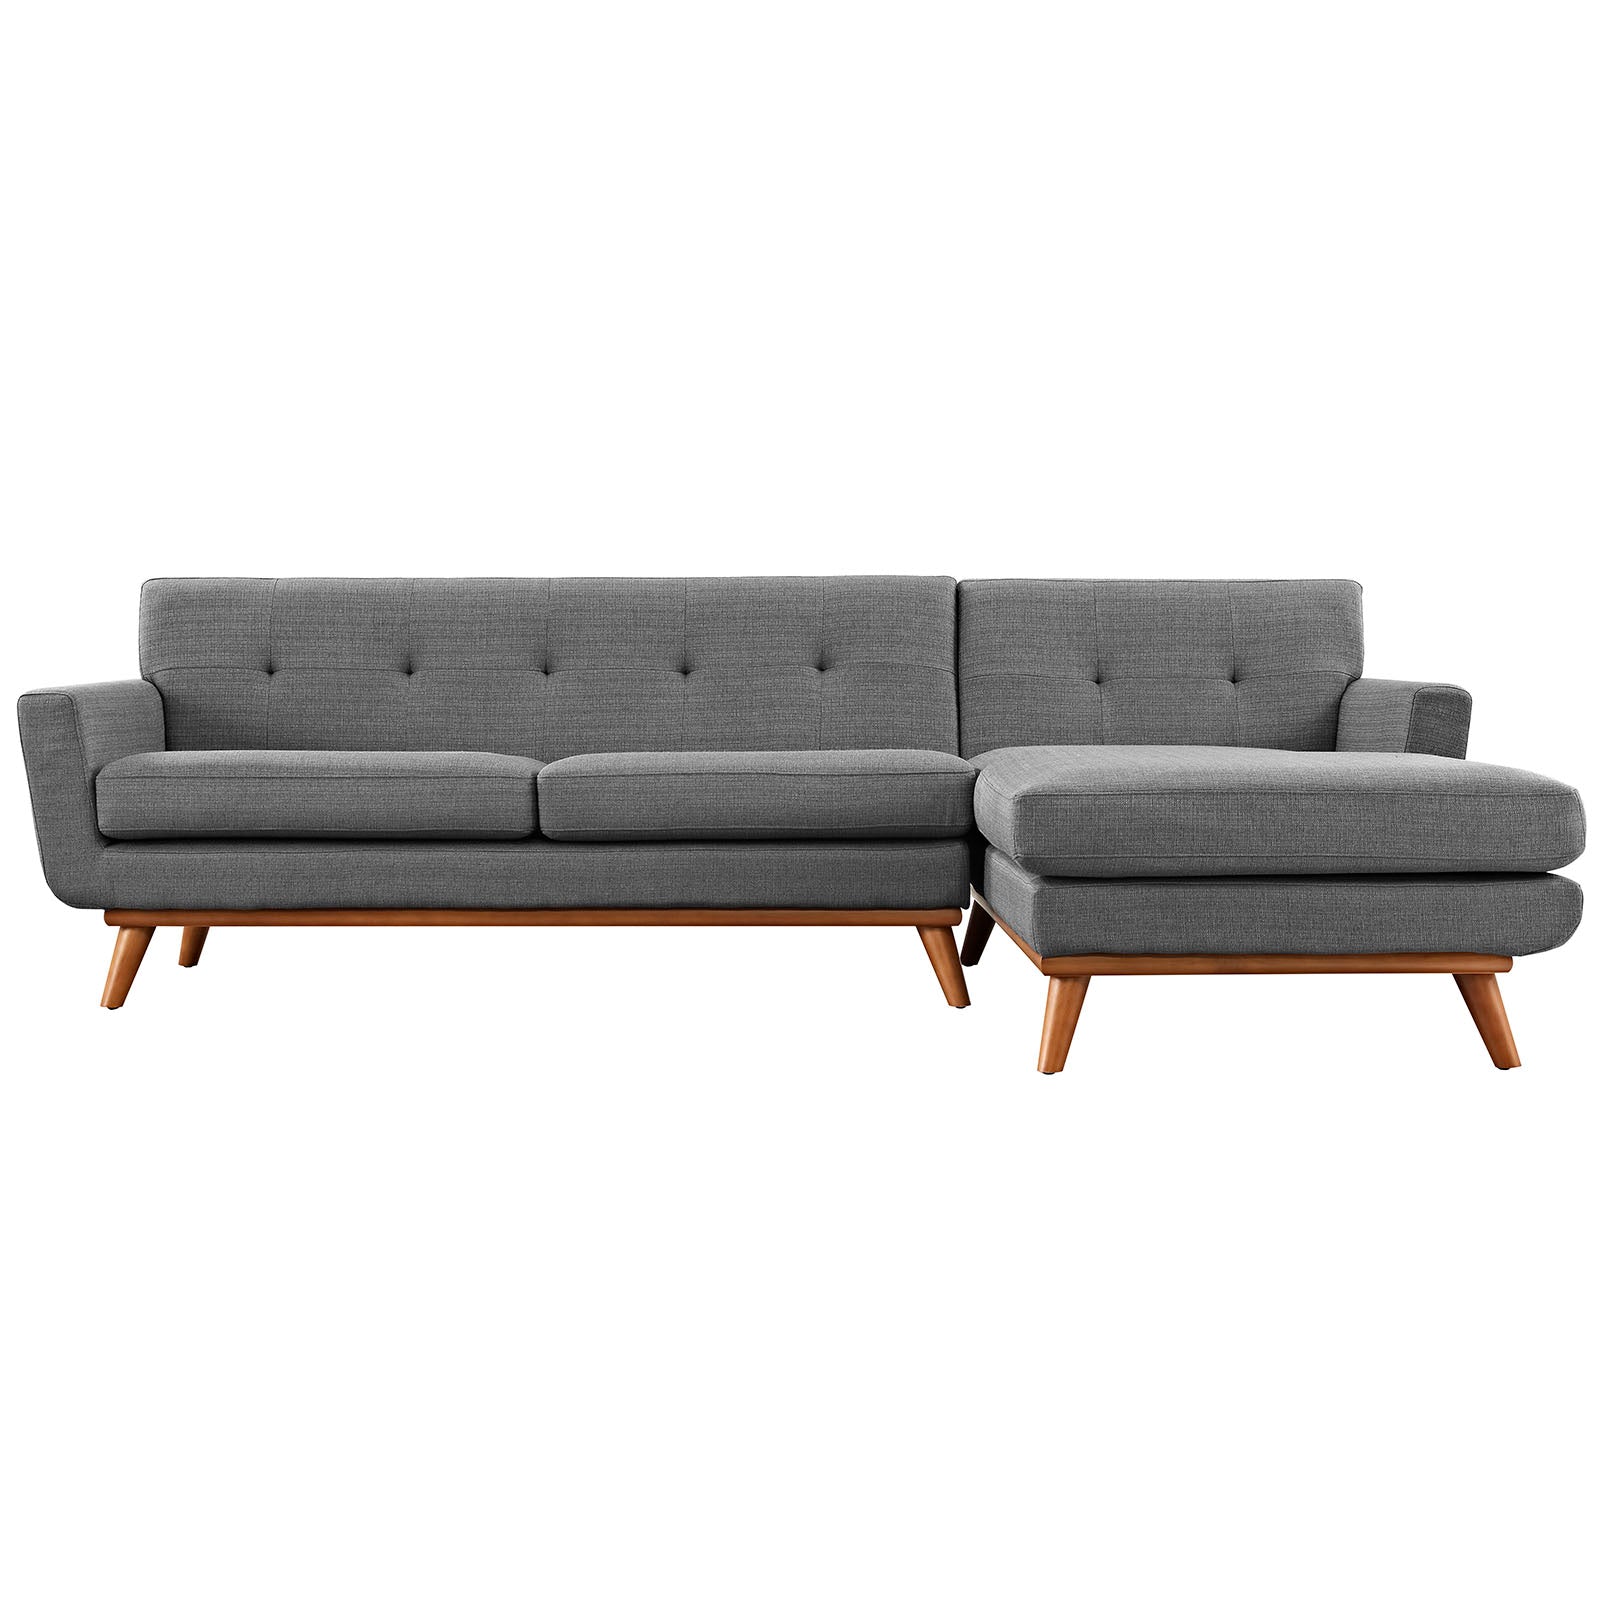 Modway Sectional Sofas - Engage Right-Facing Fabric Sectional Sofa Gray